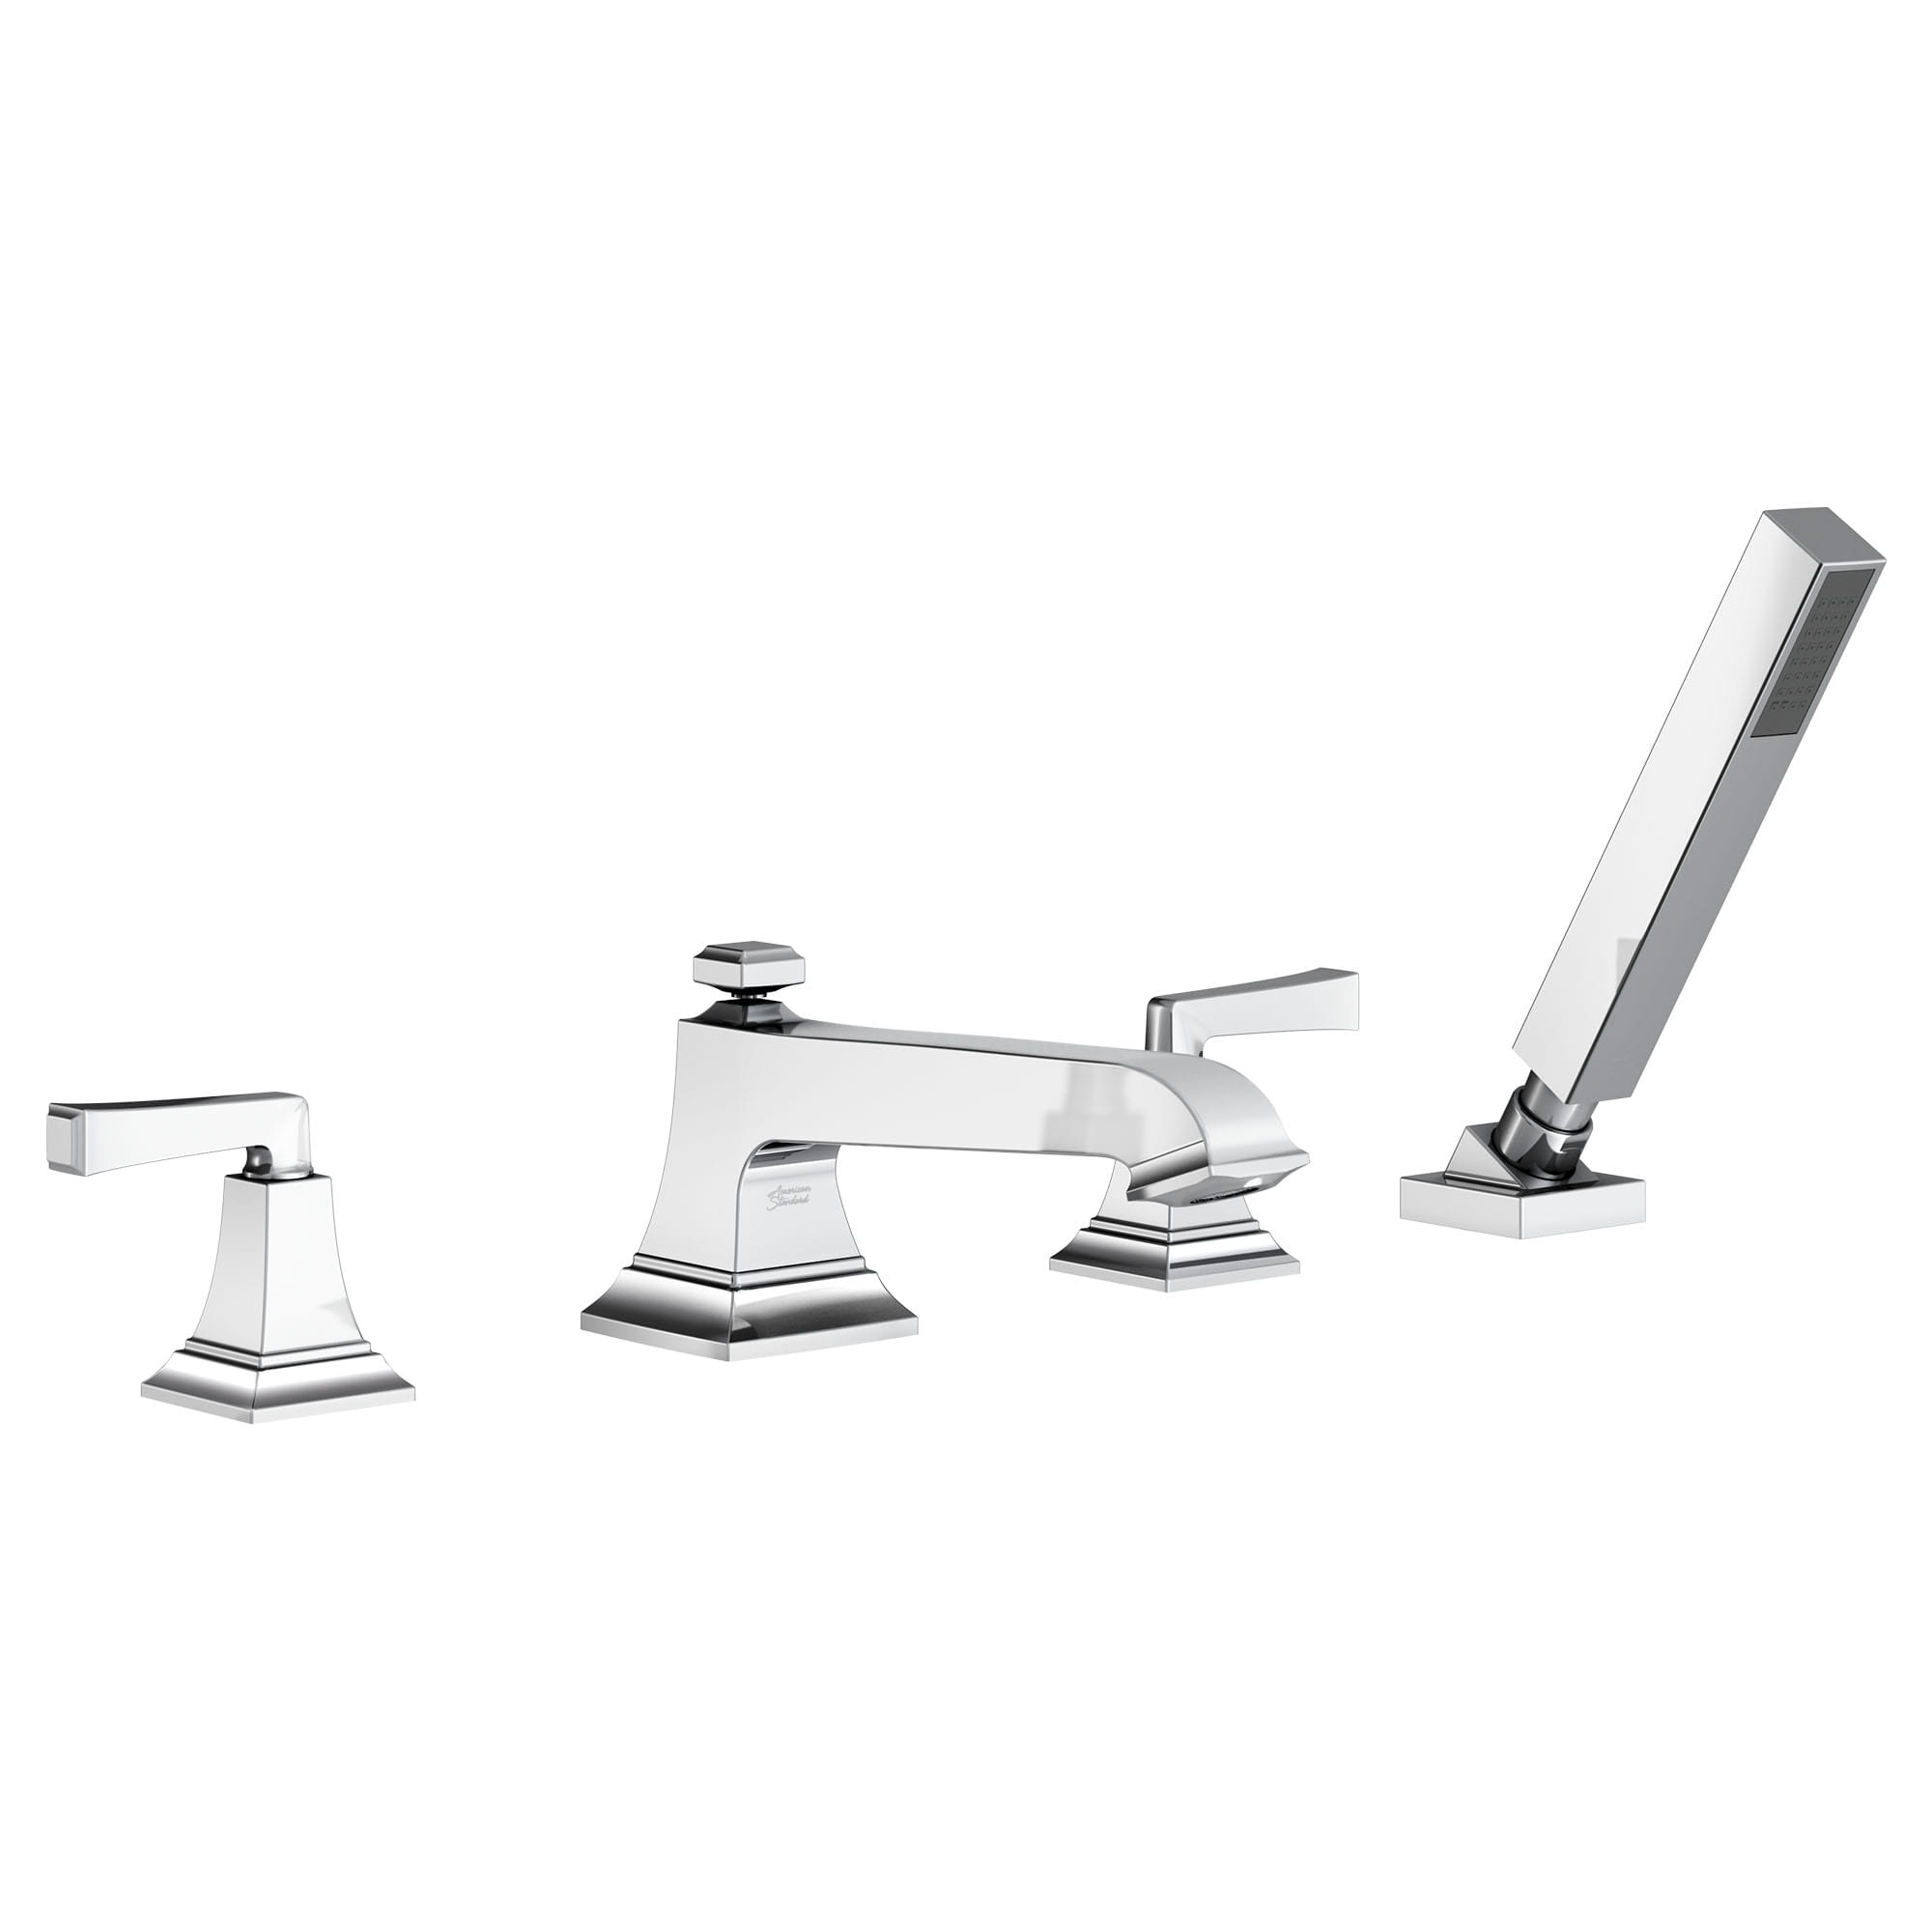 Town Square S Bathub Faucet With Lever Handles and Personal Shower for Flash Rough in Valve CHROME